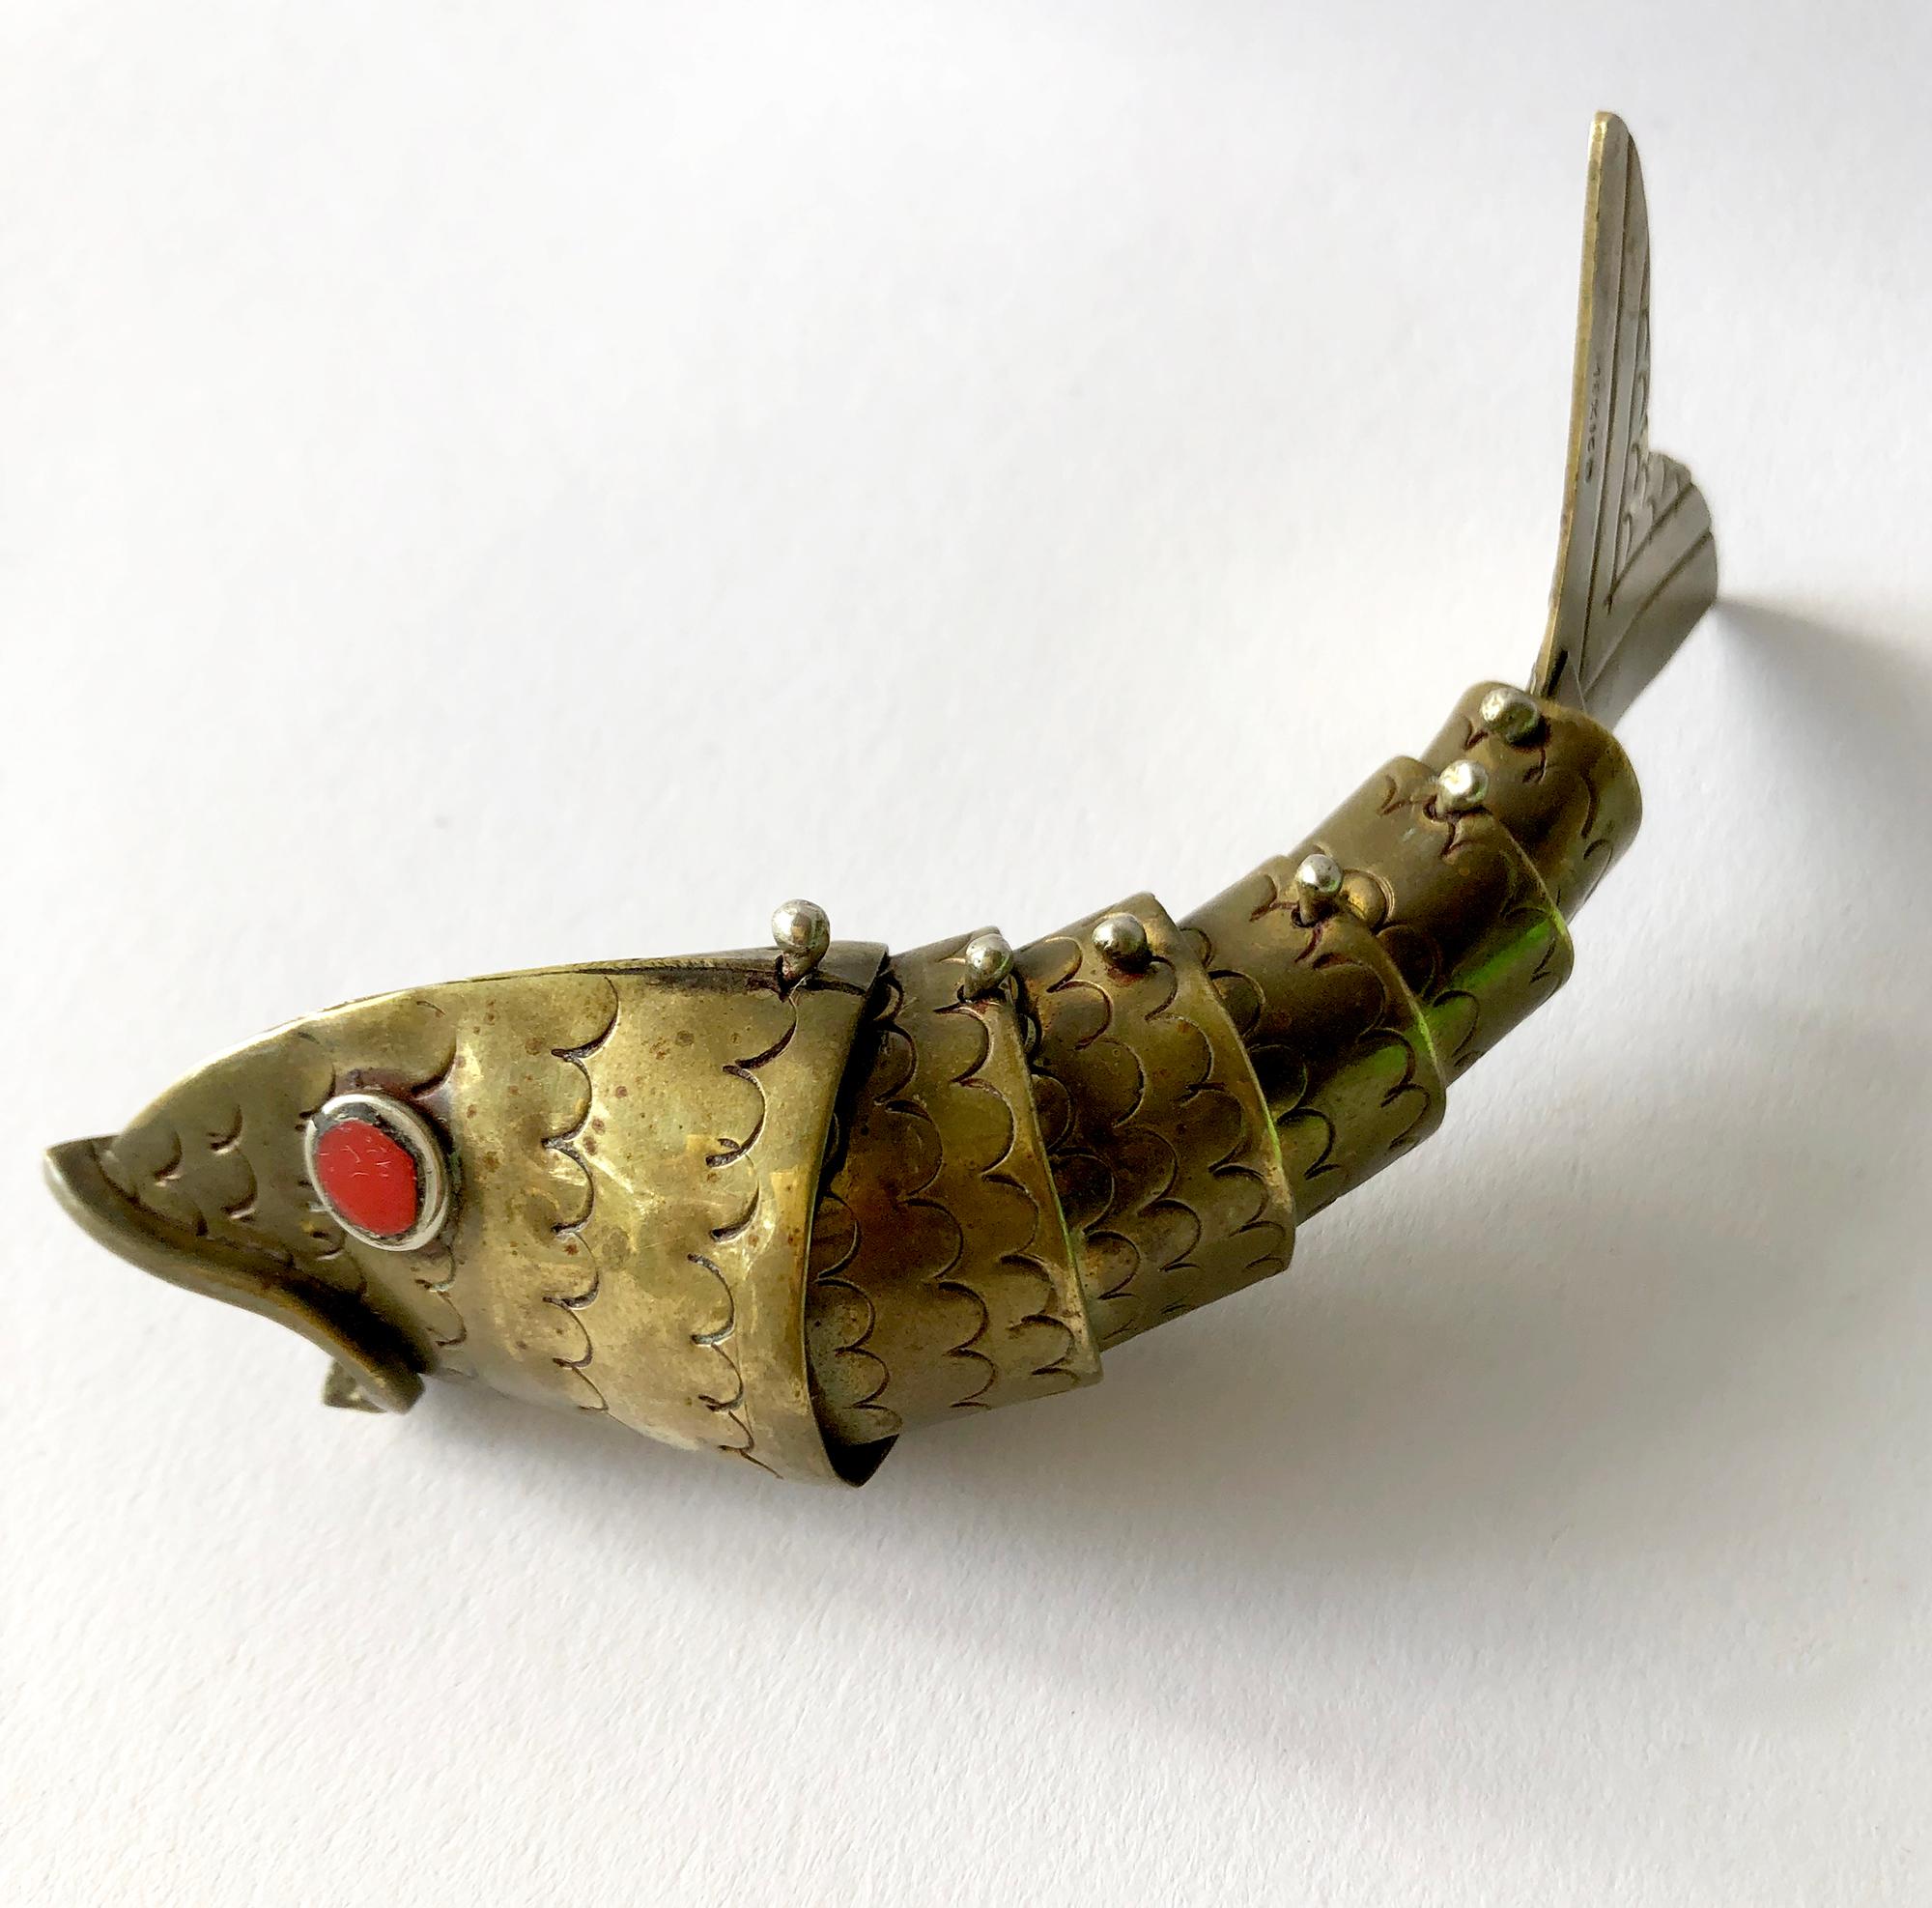 Pair of articulating brass fish with coral eyes from Mexico. Fish measure 4.5